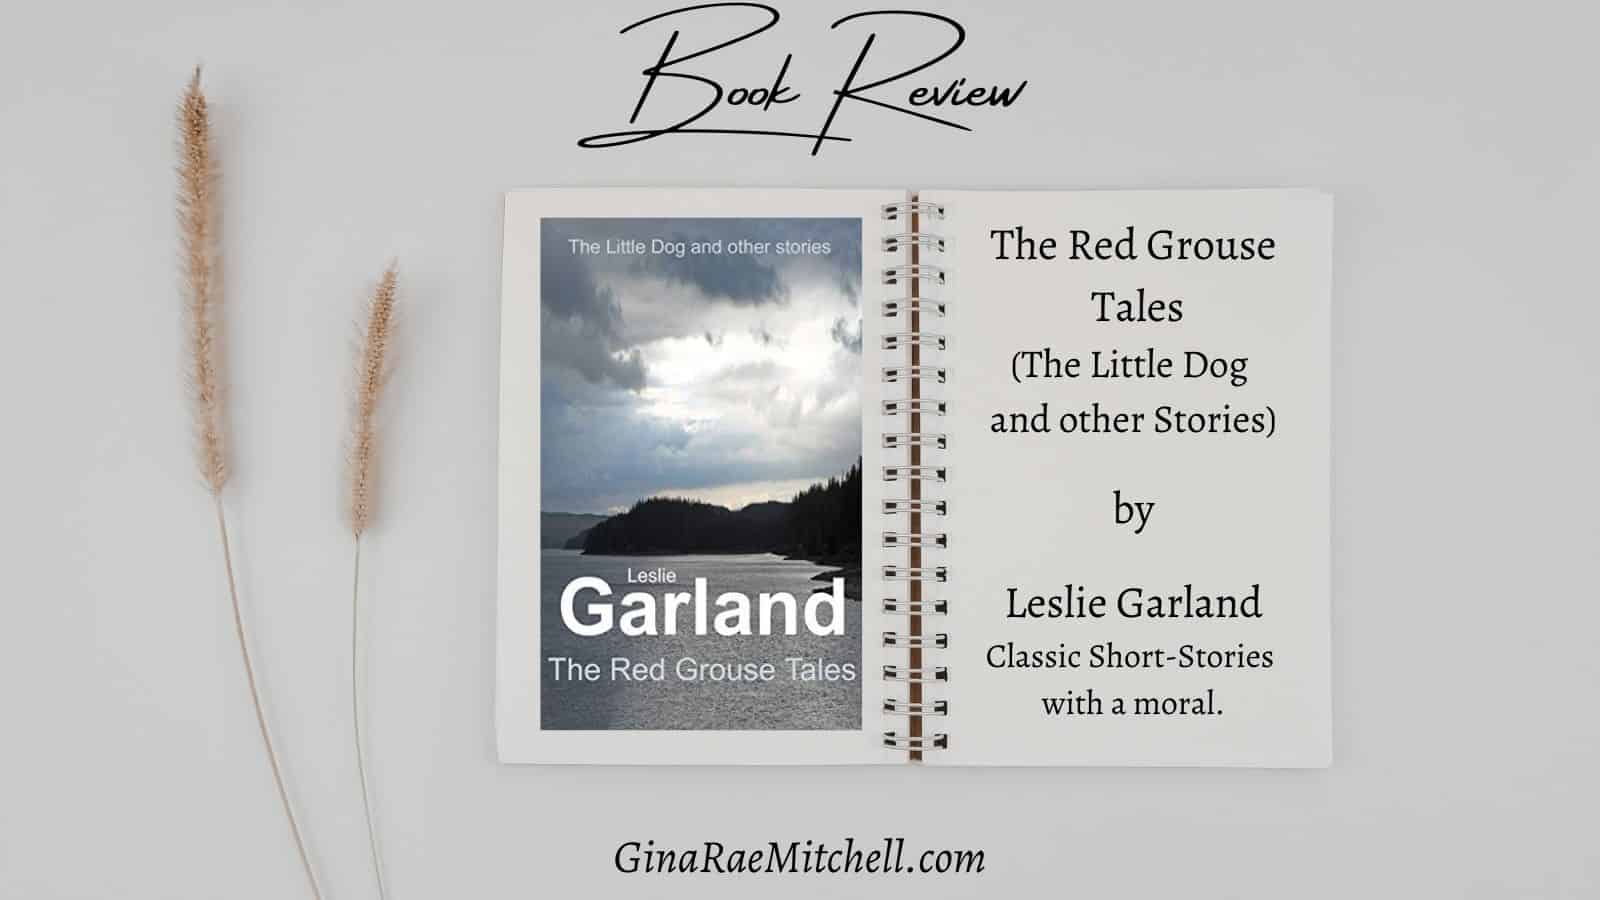 The Red Grouse Tales (The Little Dog and Other Stories) by Leslie Garland | 4-Star Review